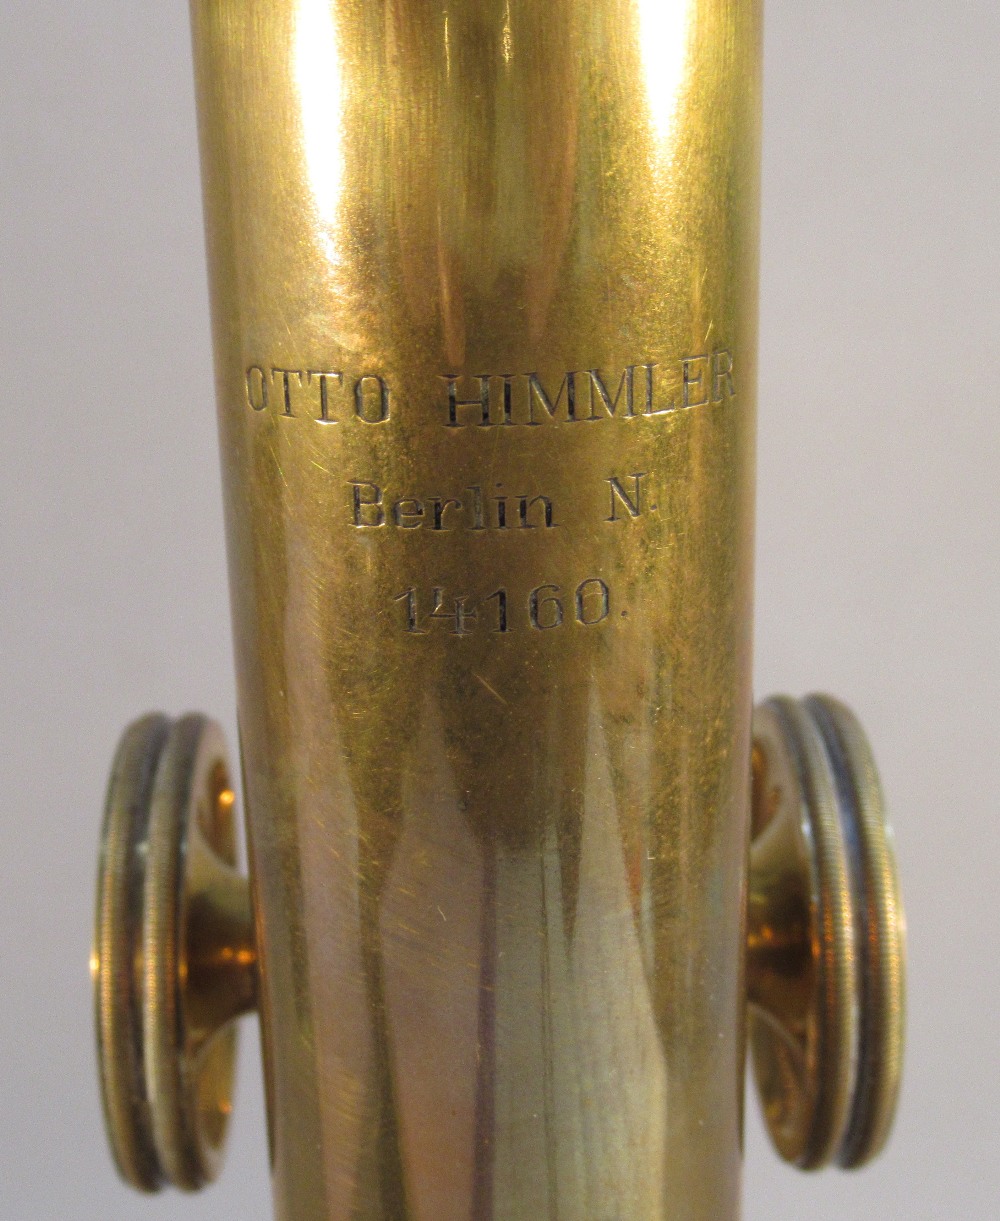 A LATE C19th BRASS MICROSCOPE BY OTTO HIMMLER. BERLIN N.14160 LACQUERED BRASS, HORSE SHOE FOOT, - Image 10 of 10